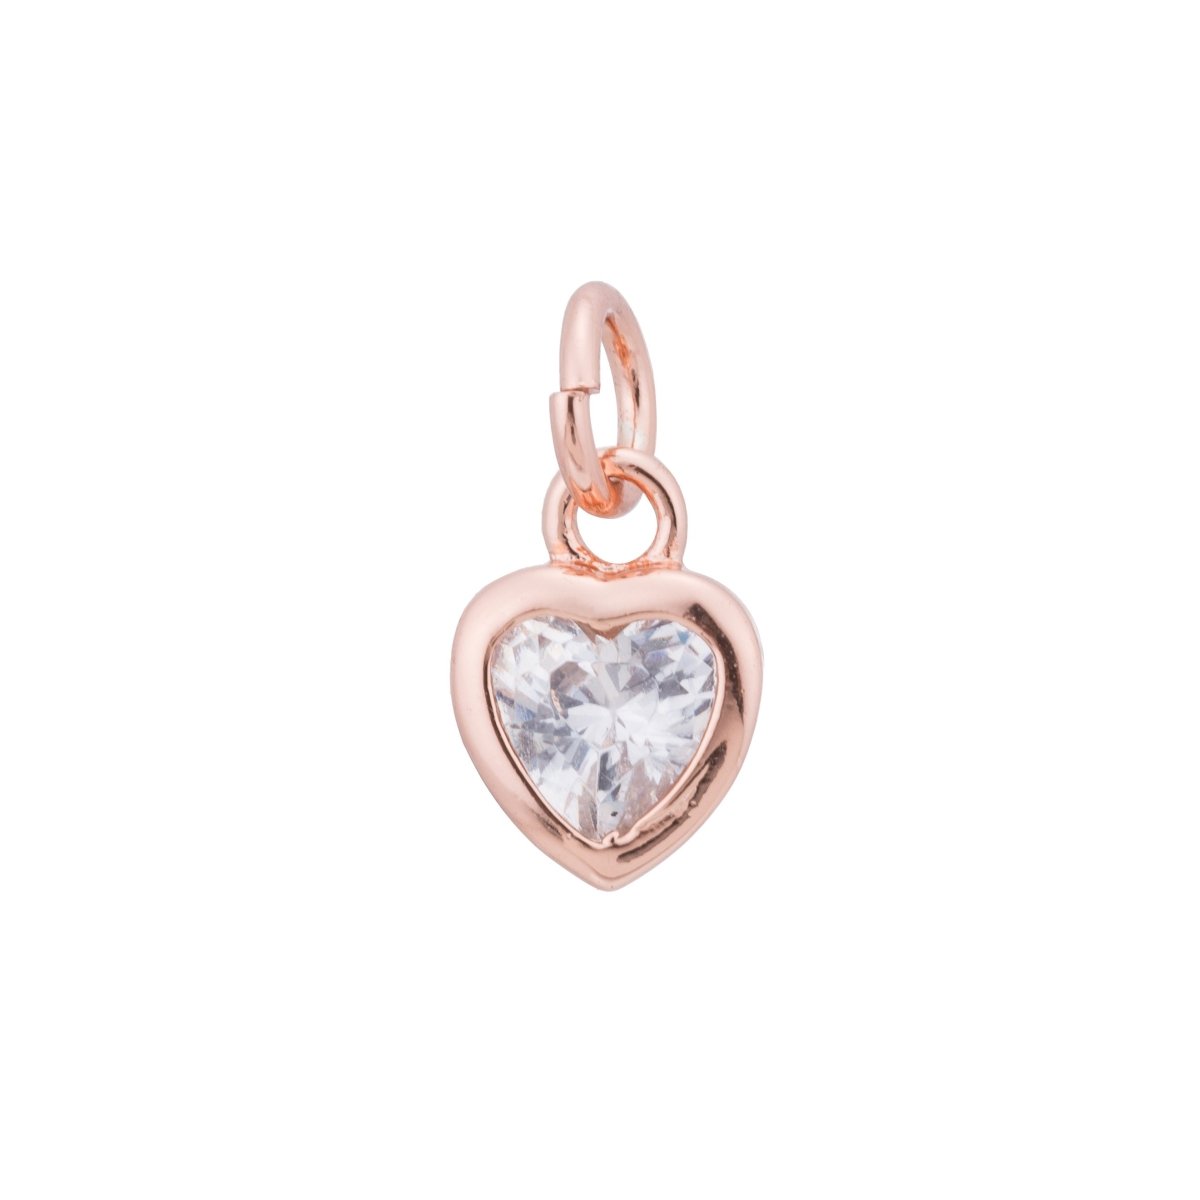 Gold / Silver / Rose Gold Filled Heart Diamond, Cute Love, Dangle Charm, Modern Craft Gift Cubic Zirconia Bracelet Charm Bead Findings Pendant For Jewelry Making | E-230 E-232 - DLUXCA